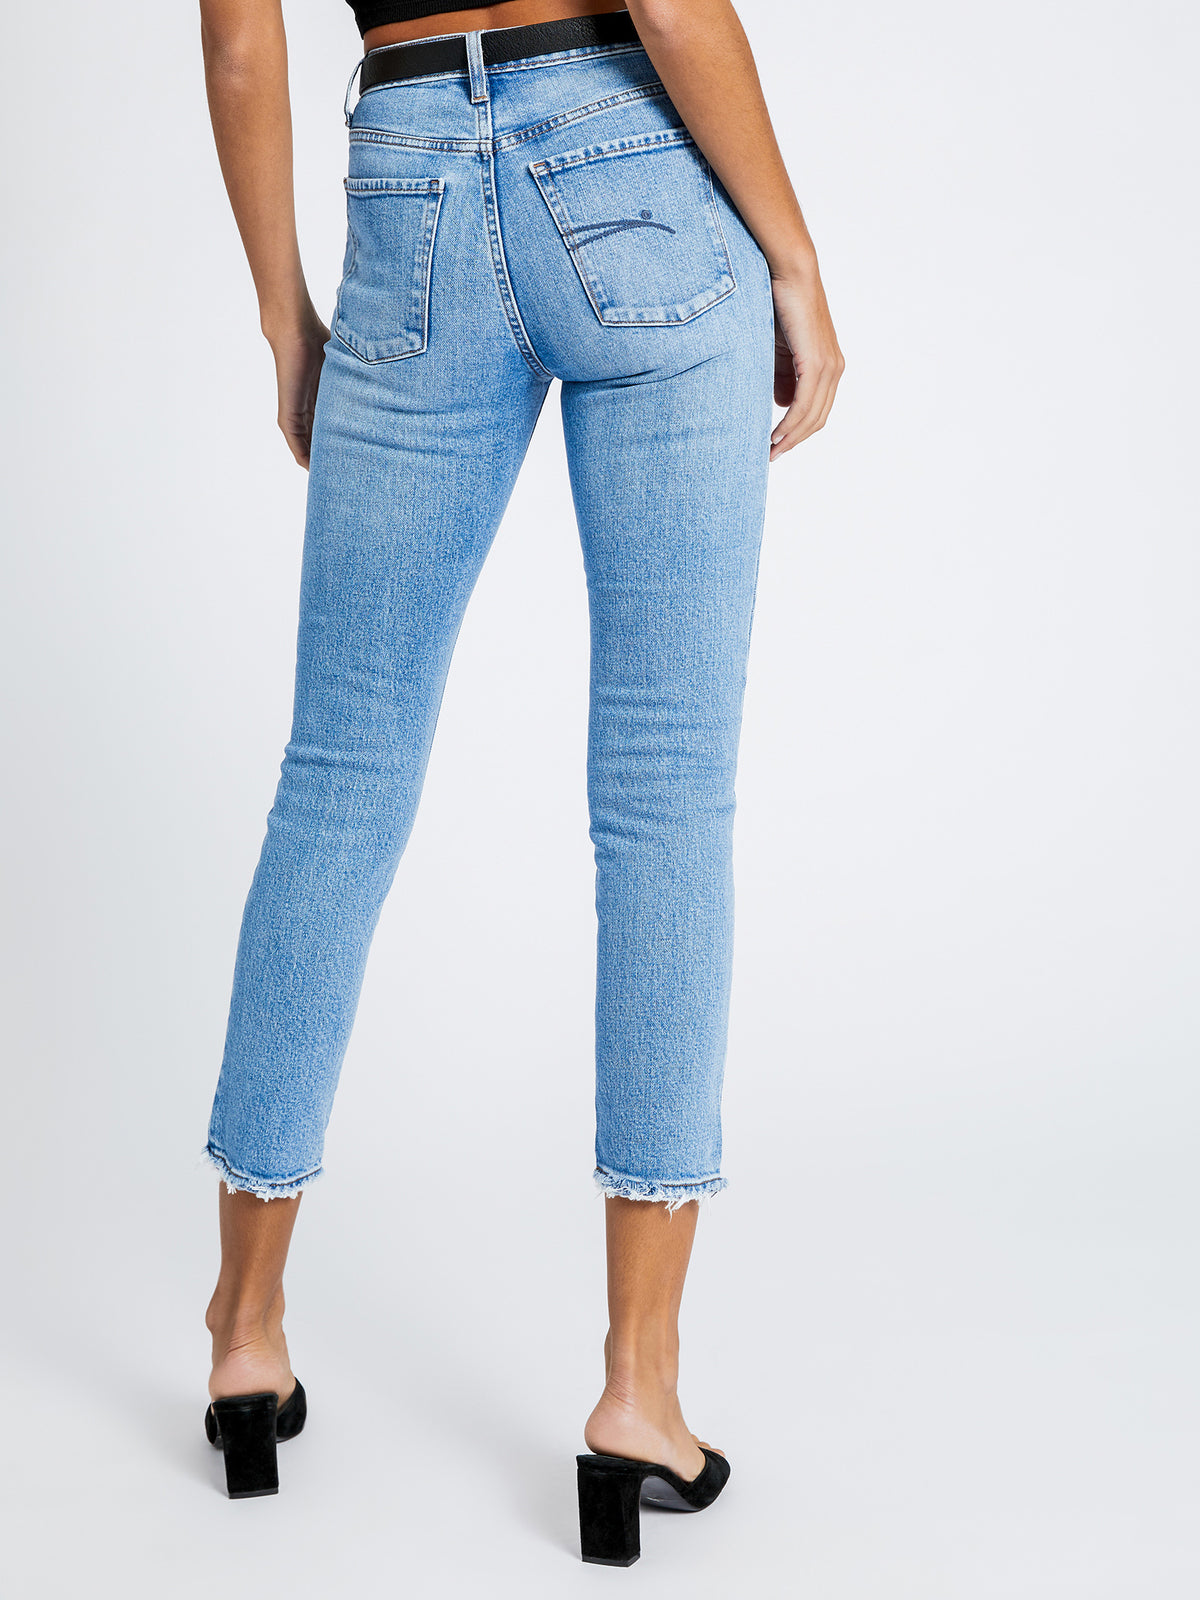 Kennedy High-Rise Slim Cropped Jeans in Moden Blue Denim